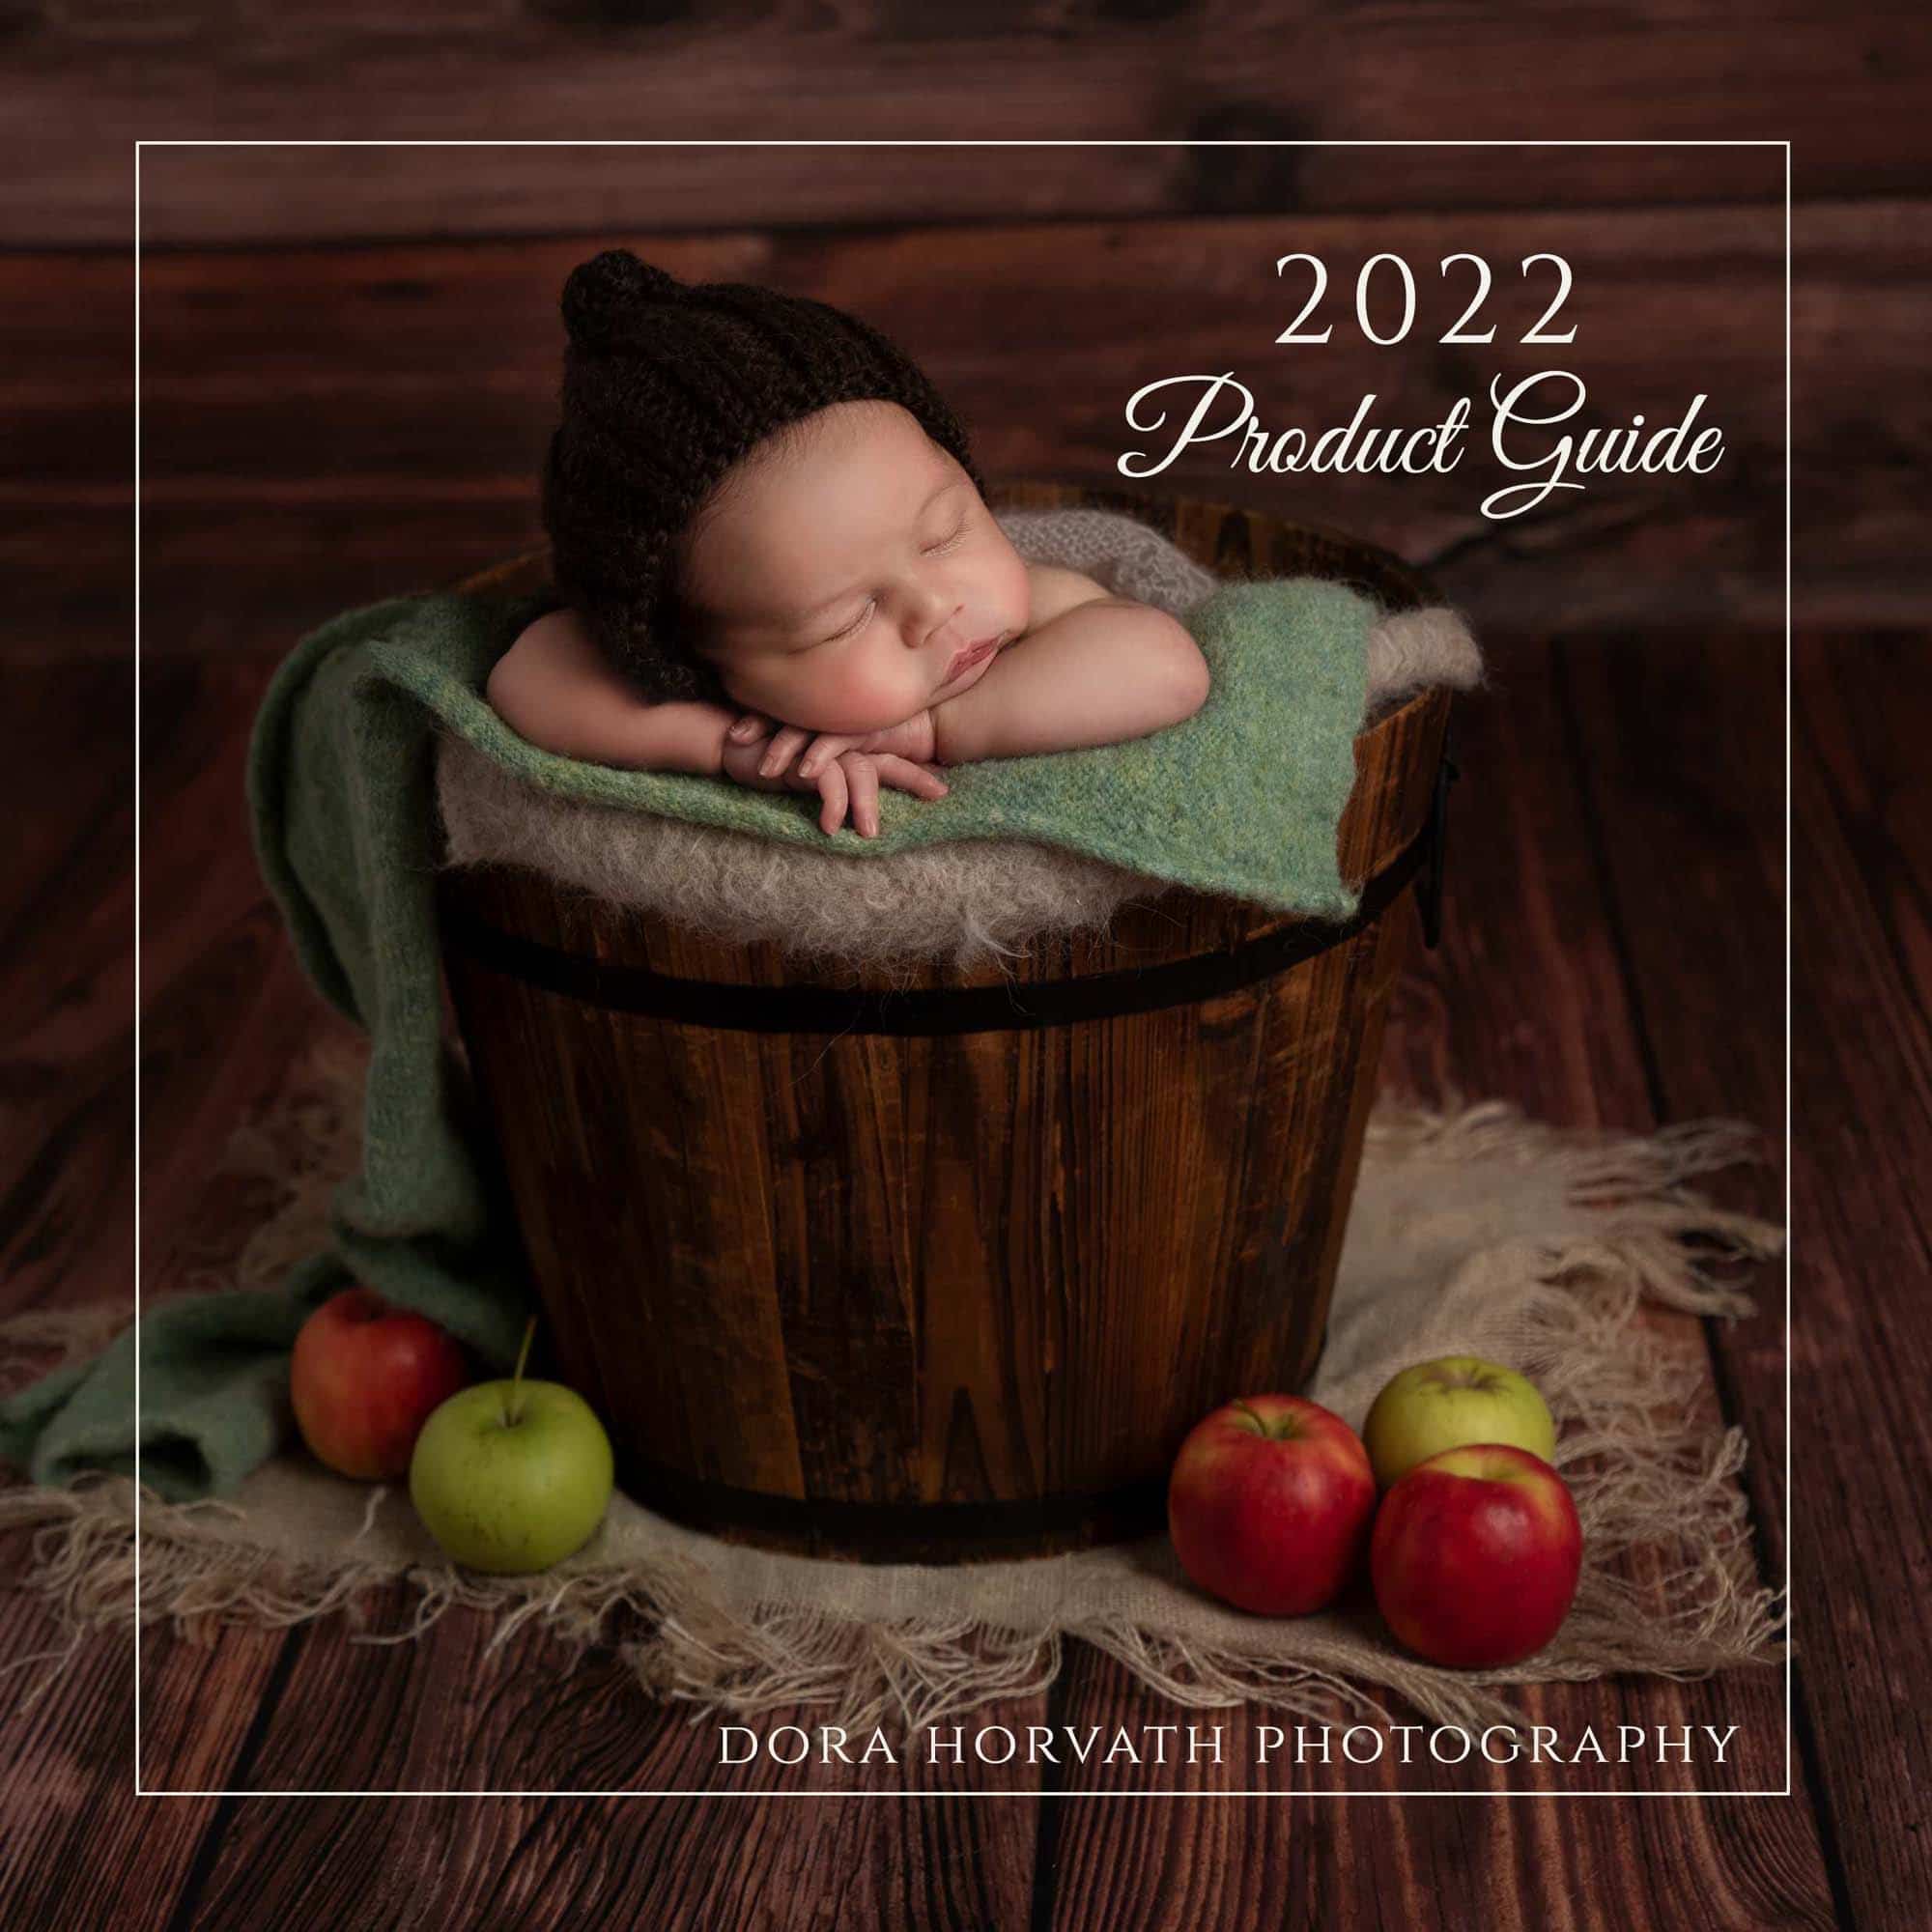 product guide of newborn baby taken by newborn photographer Dora Horvath